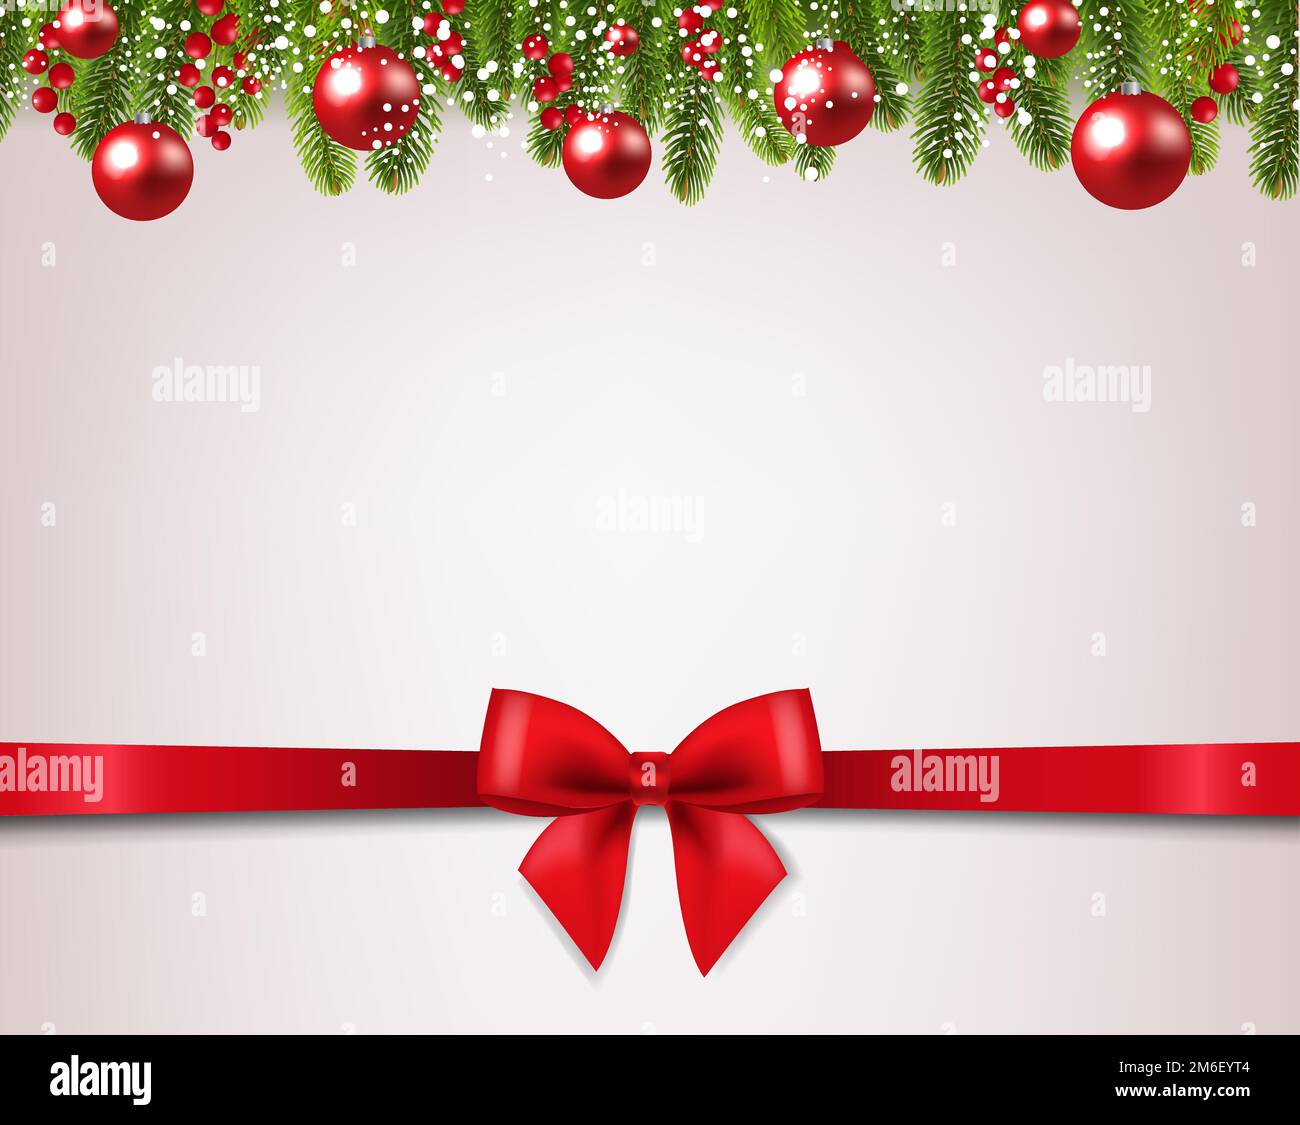 Christmas Red Sale Label With Red Silk Ribbon - Stock